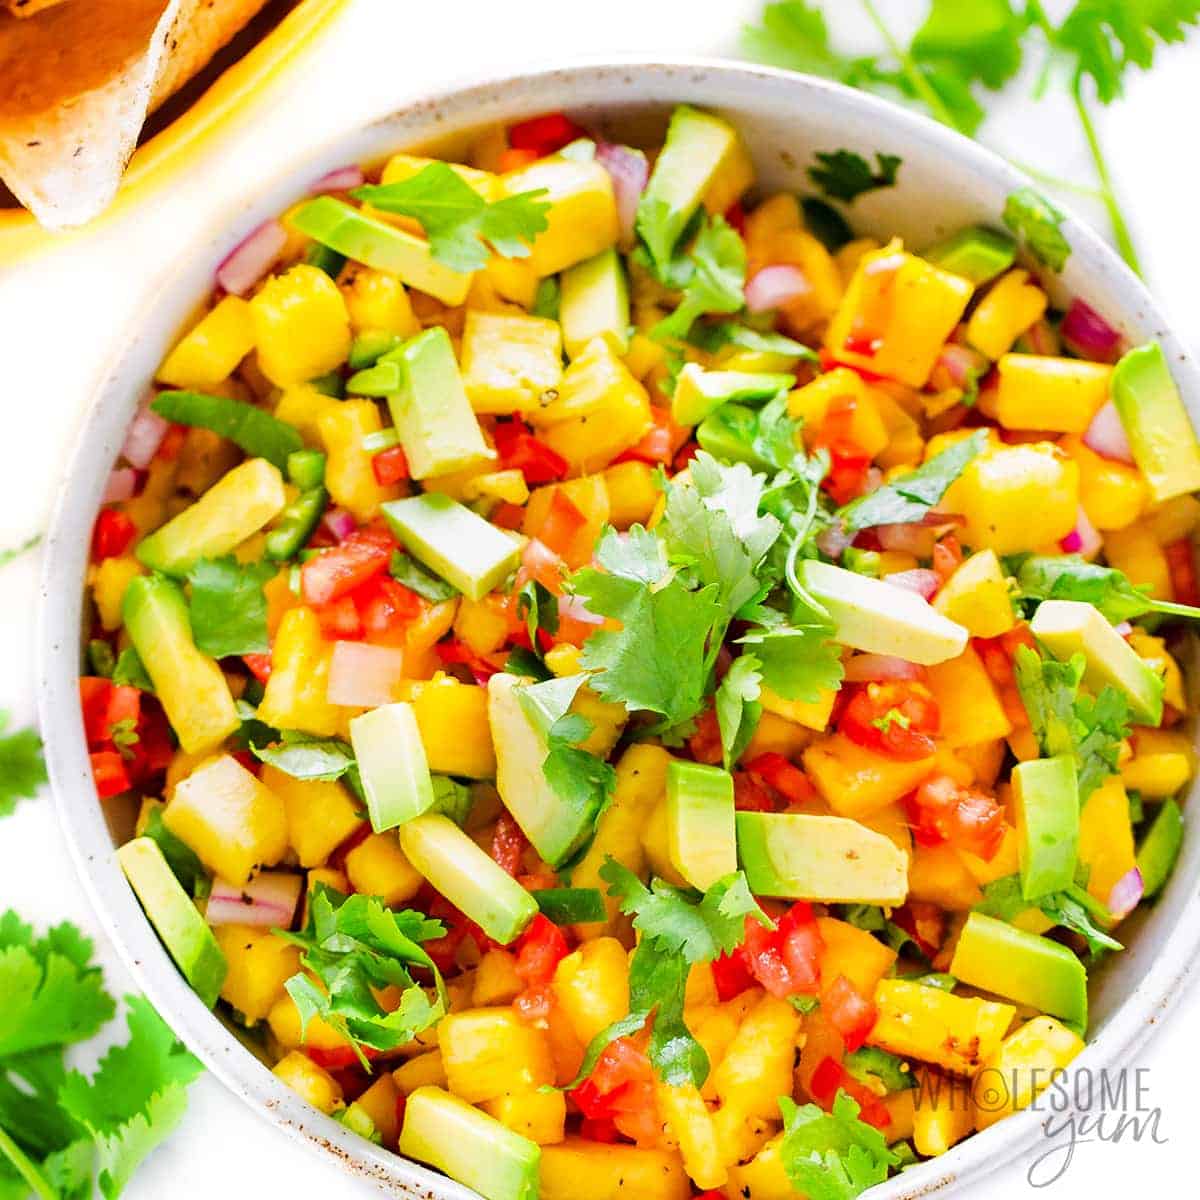 Mix the pineapple-finished salsa in a bowl.